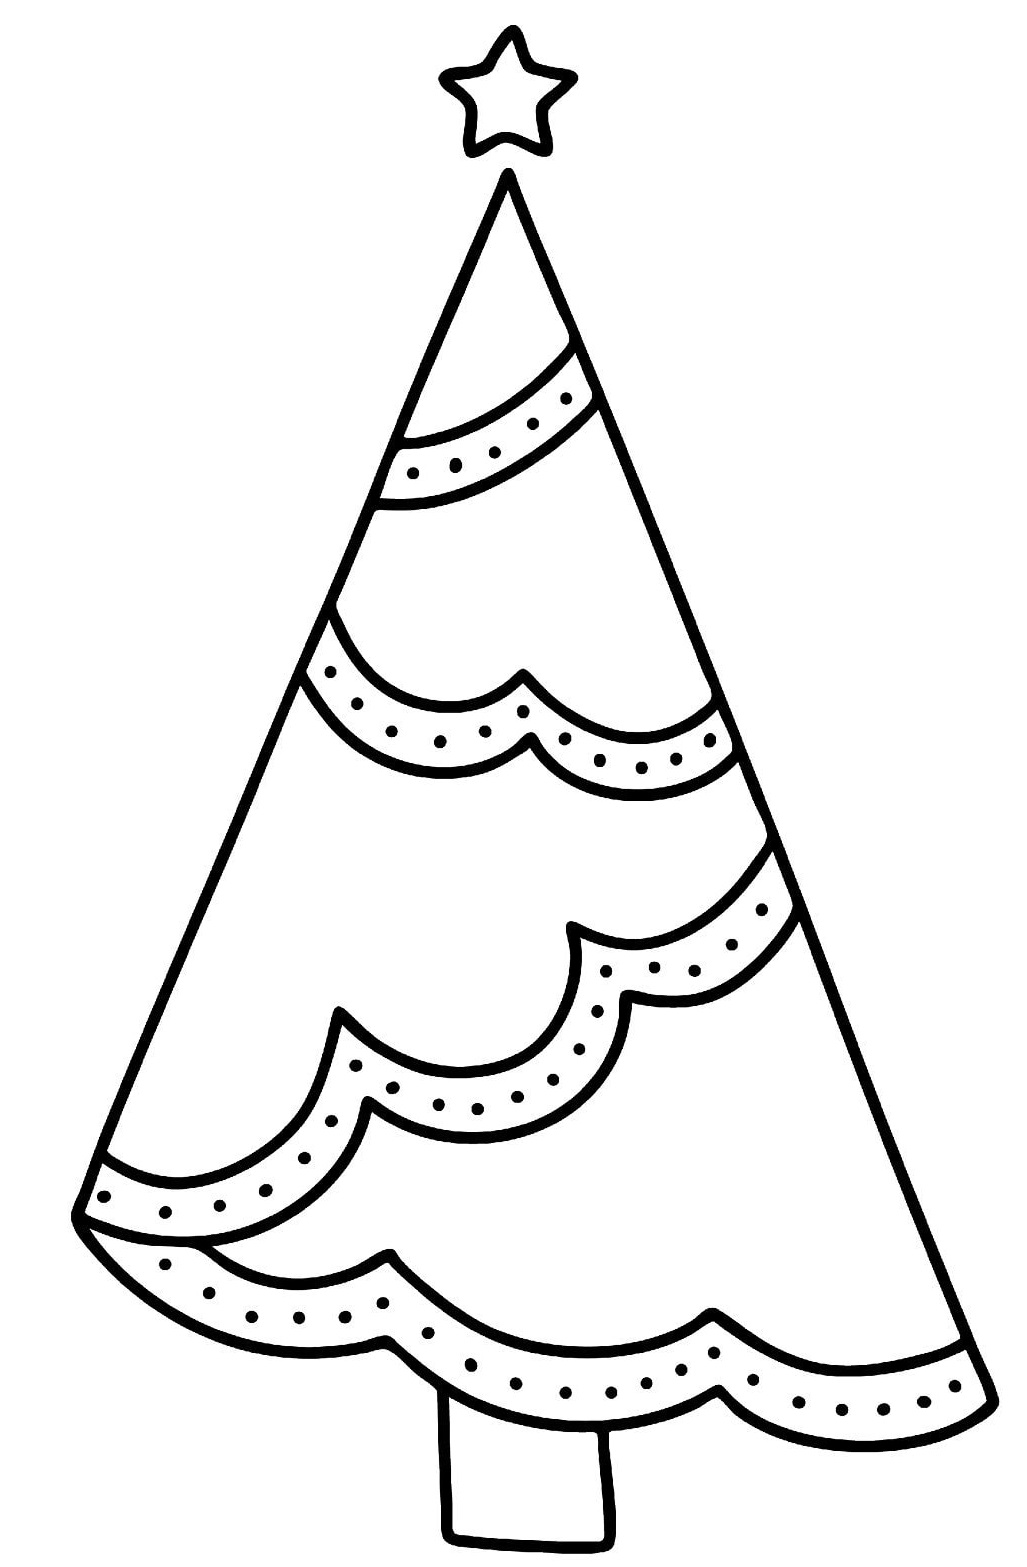 Simple Xmas Tree Design With Easy Decorations To Color Coloring ...